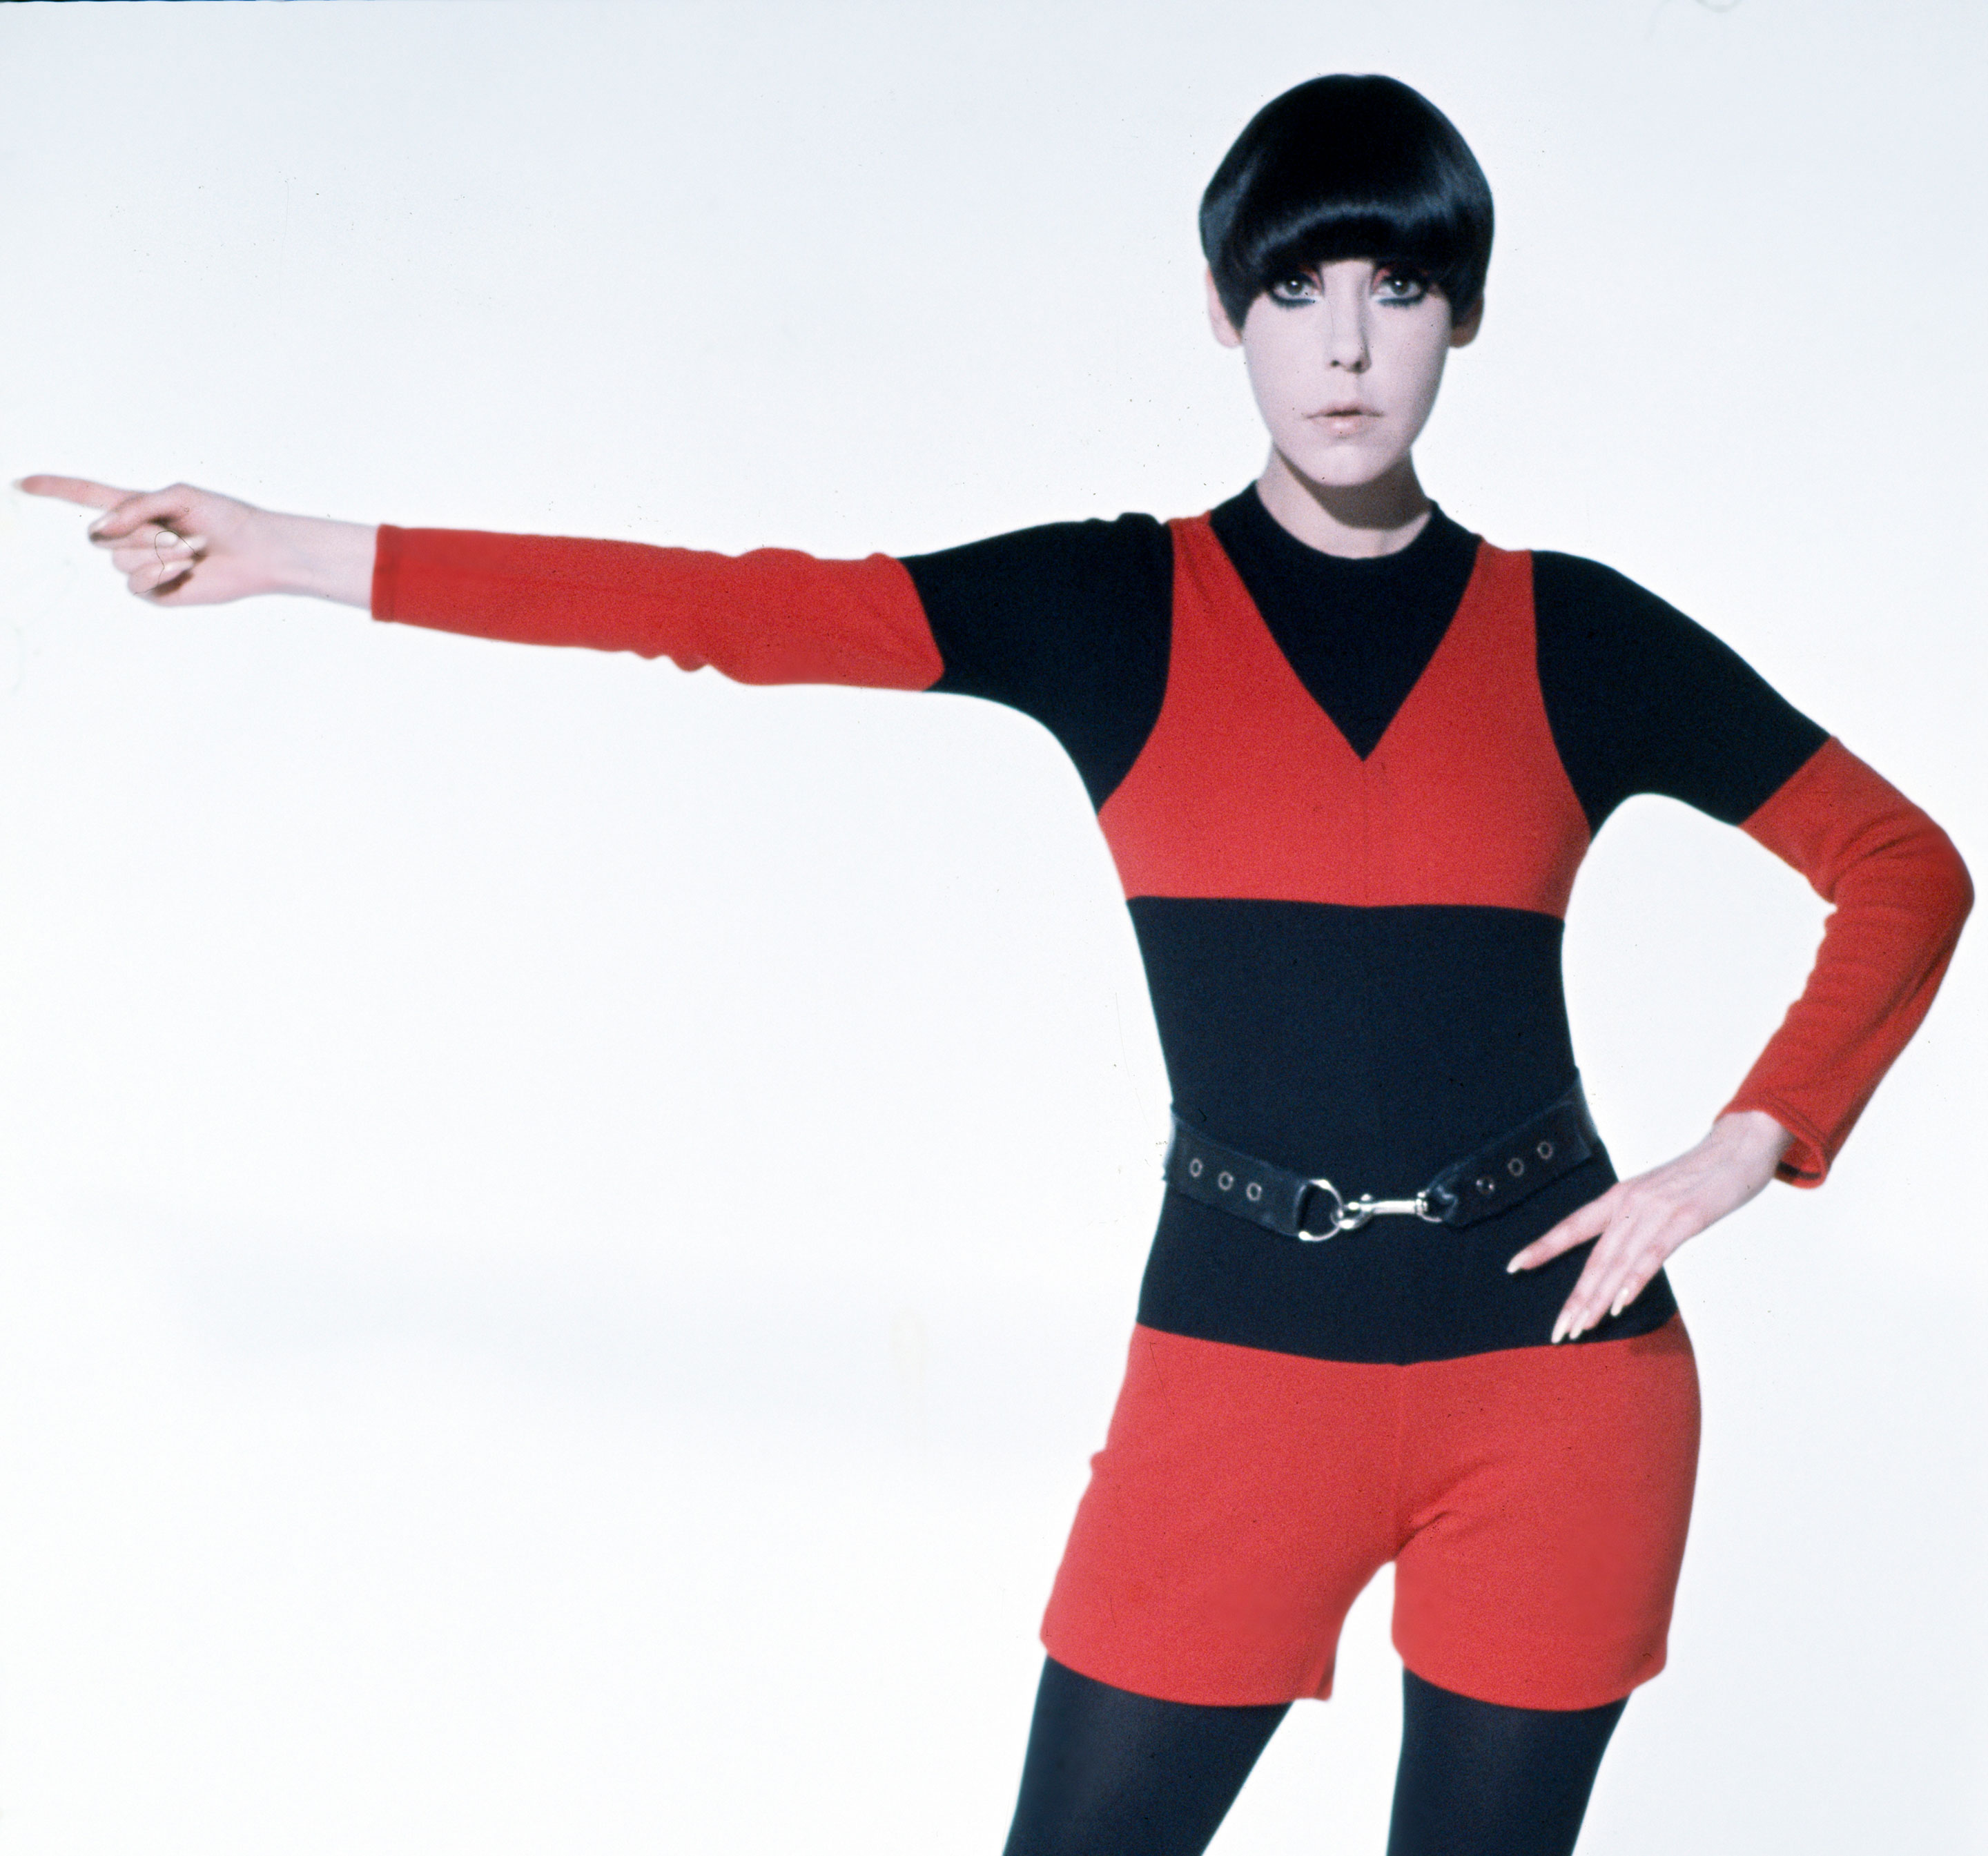 Peggy Moffitt modeling trompe l’oeil ensemble designed by Rudi Gernreich, Resort 1971 collection Photograph © William Claxton, LLC, courtesy of Demont Photo Management & Fahey/Klein Gallery Los Angeles, with permission of the Rudi Gernreich trademark.